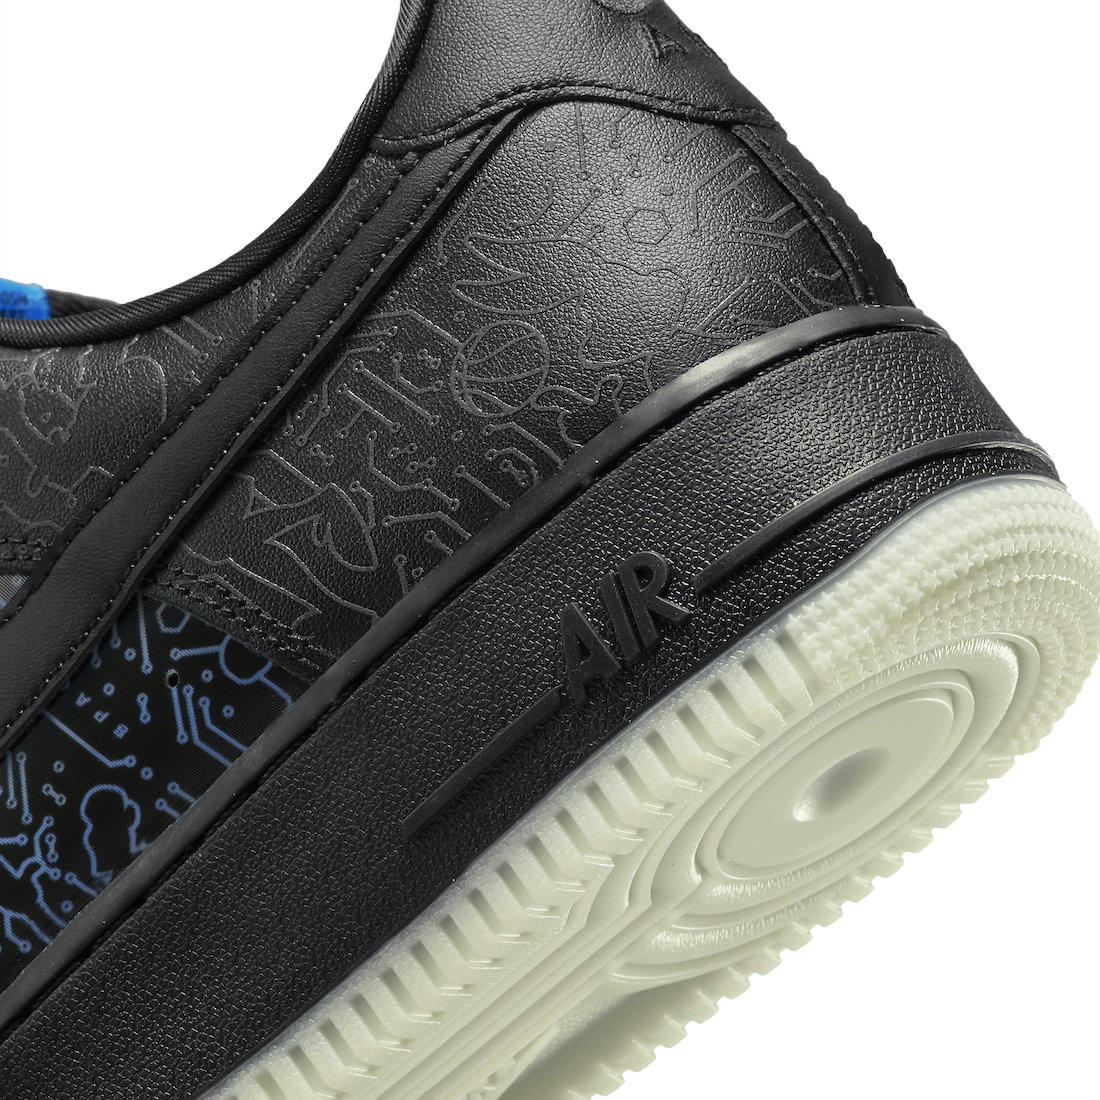 Space Jam x Nike Air Force 1 Low Computer Chip DH5354-001